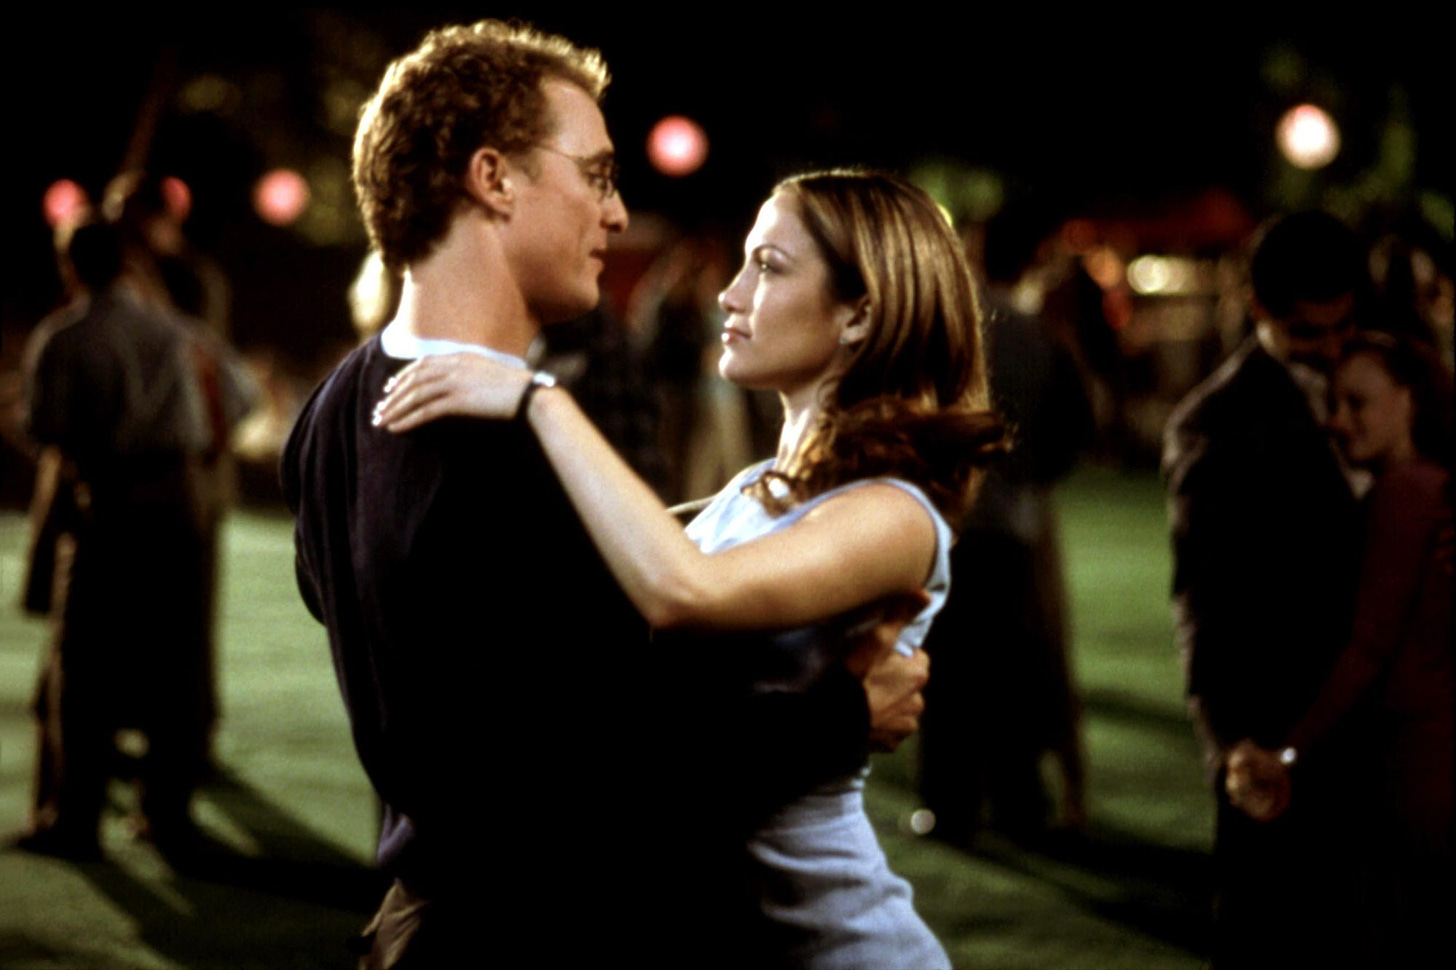 A close-up of McCaunaghey and Lopez dancing in the park at night.